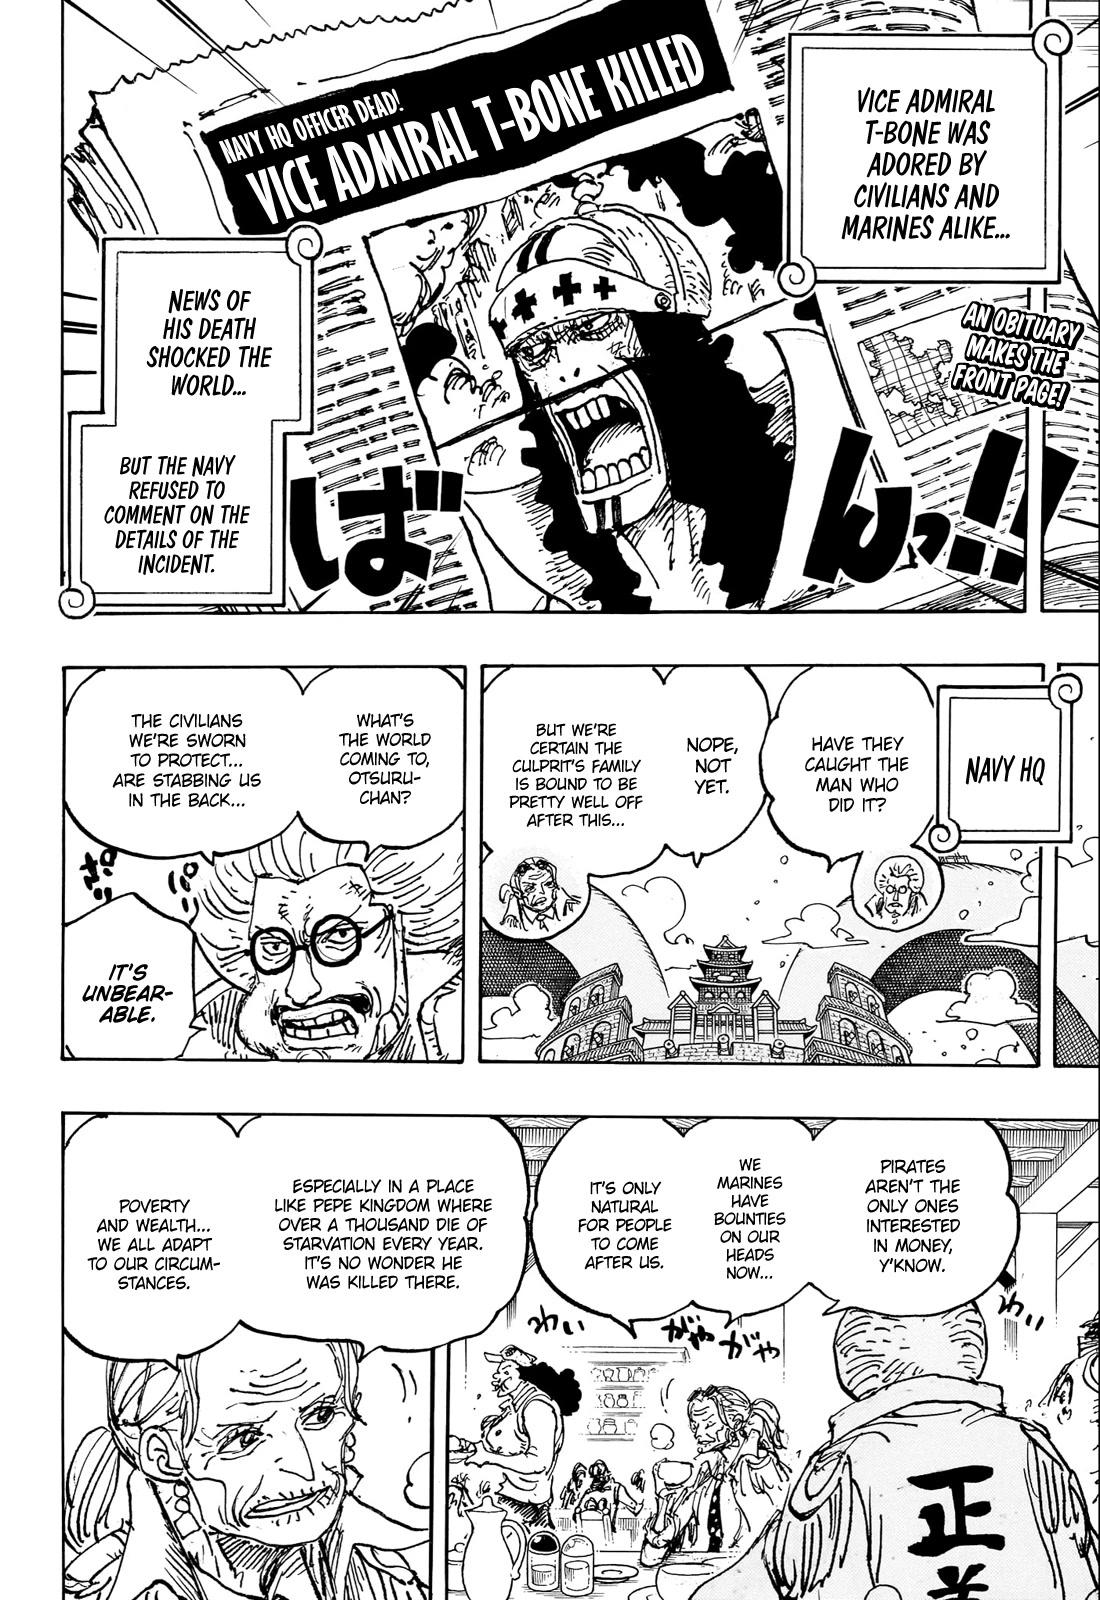 Read One Piece Chapter 1082: Let'S Go And Claim It!! - Manganelo